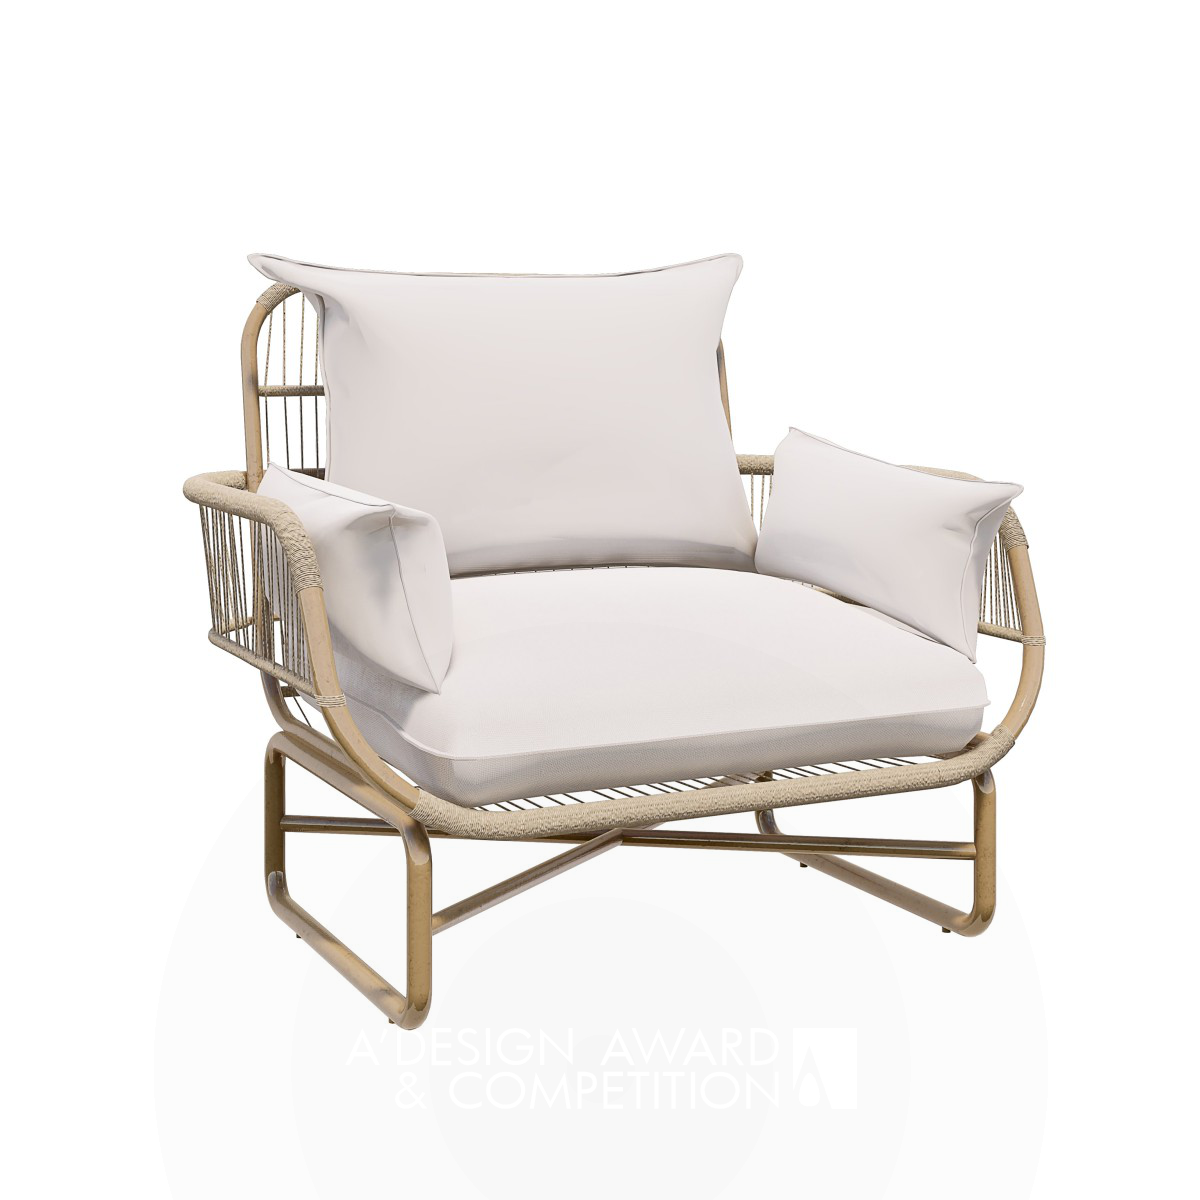 Umma Armchair: A Coastal Haven for Indoor and Outdoor Relaxation